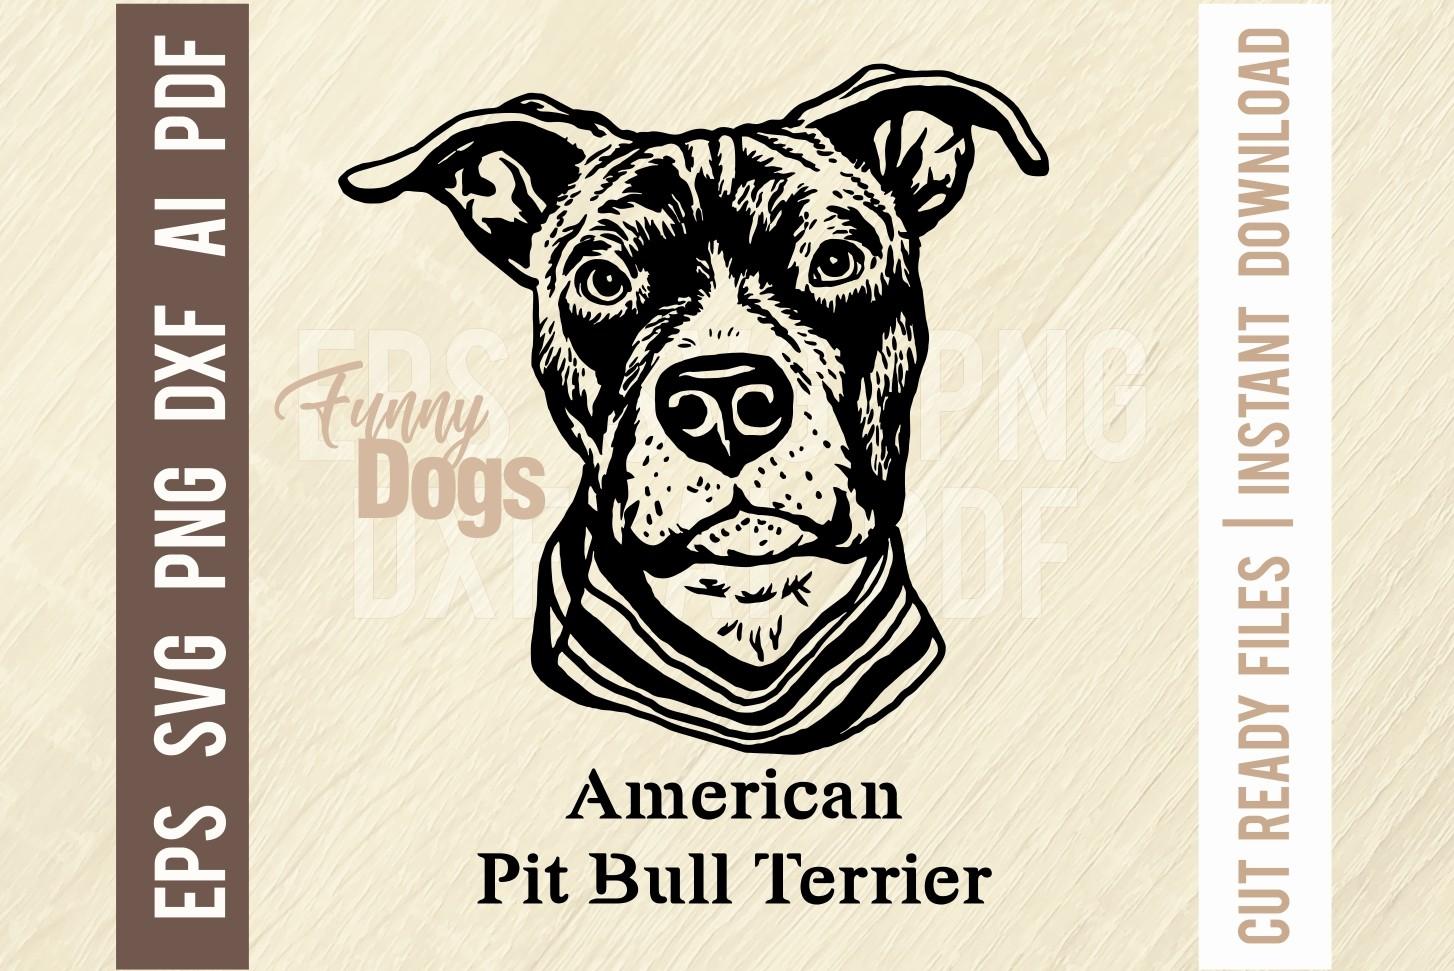 American Pit Bull Terrier Funny Dog